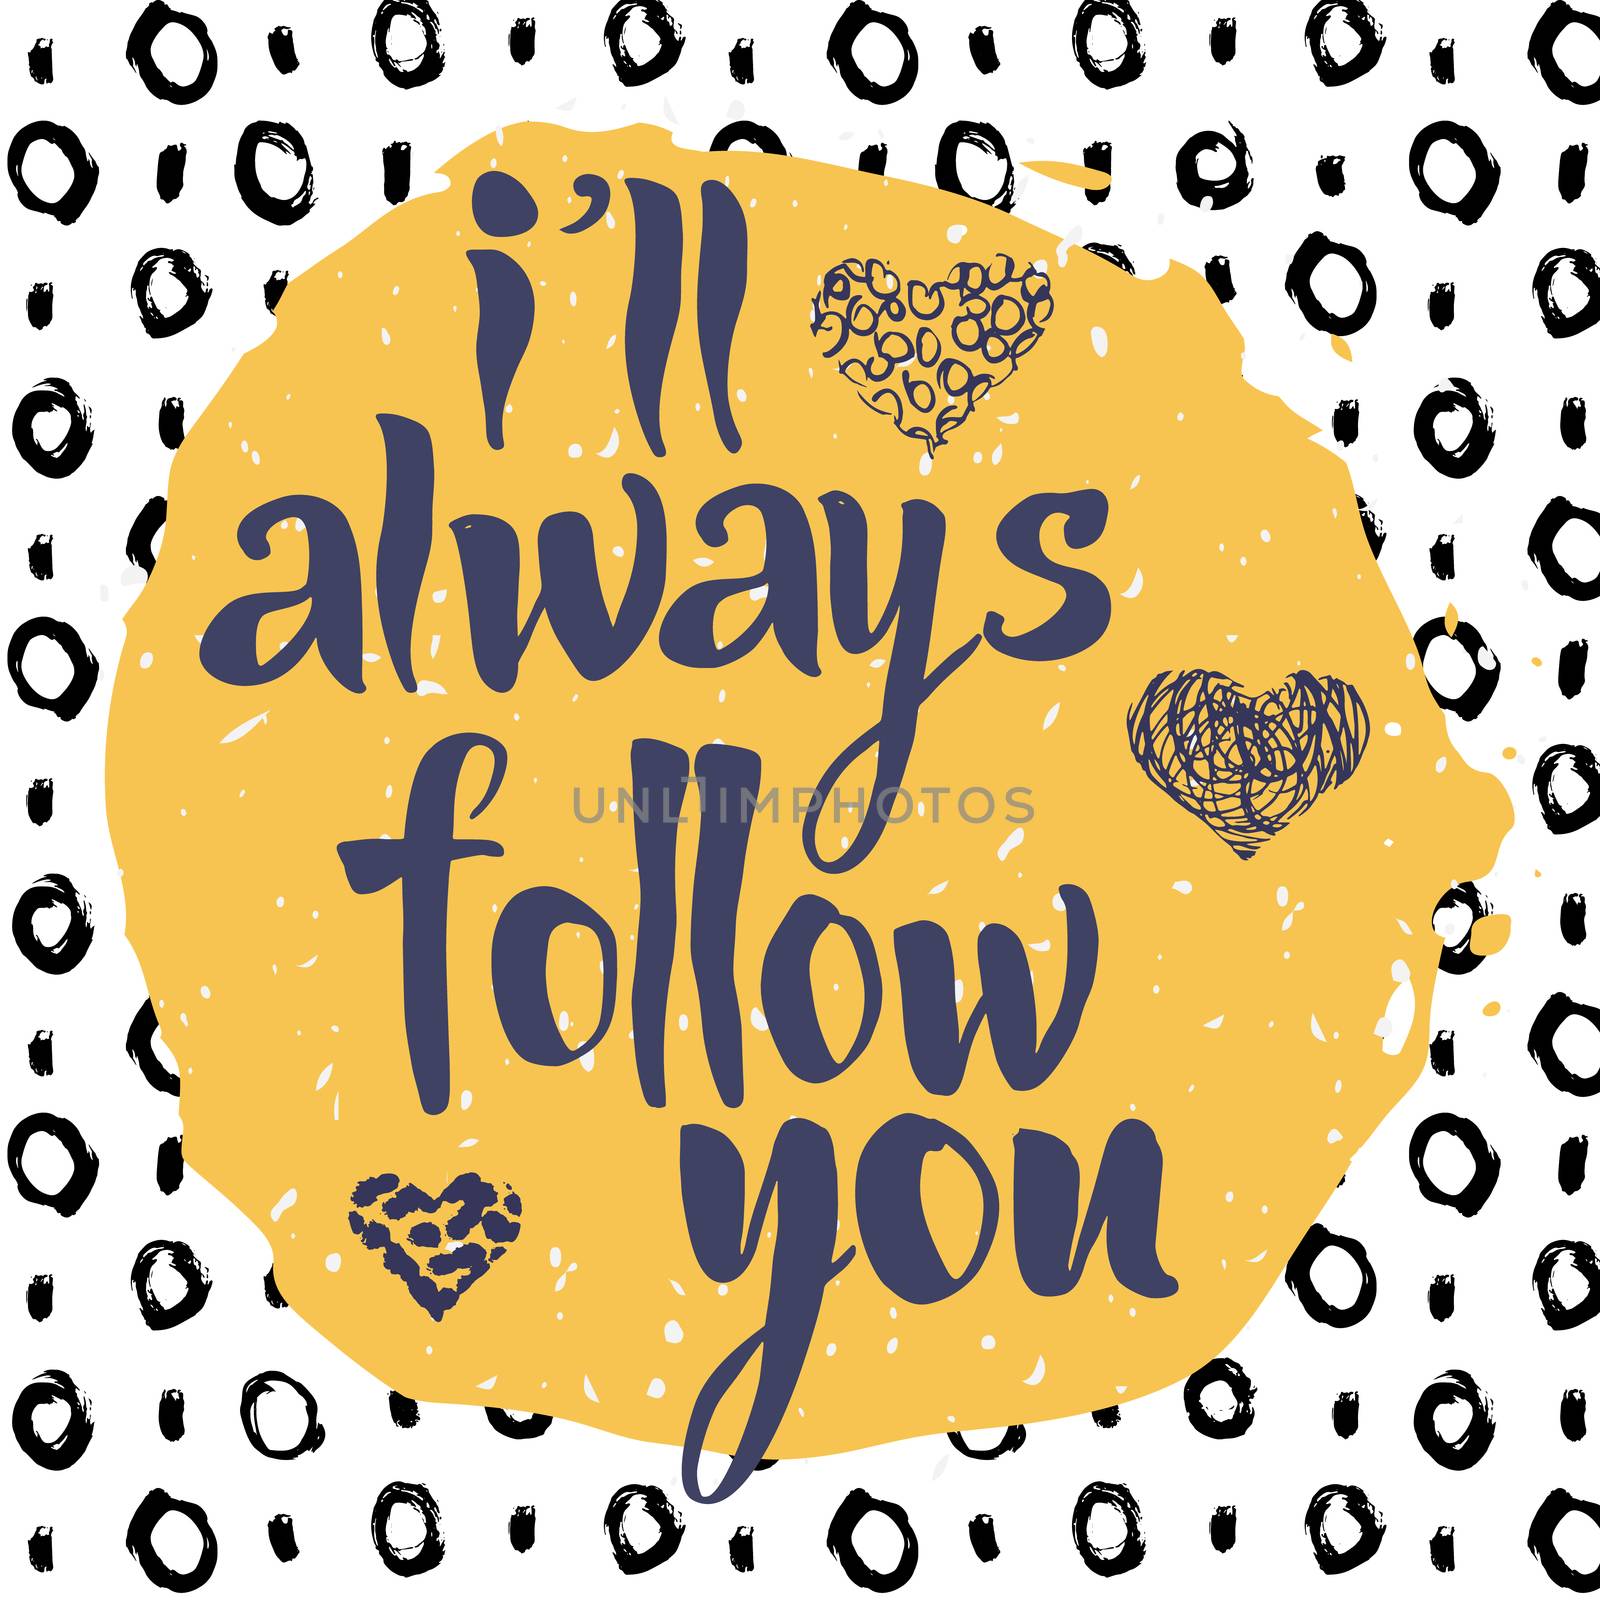 Ill always follow you, hand drawn romantic inspiration quote. by Lemon_workshop